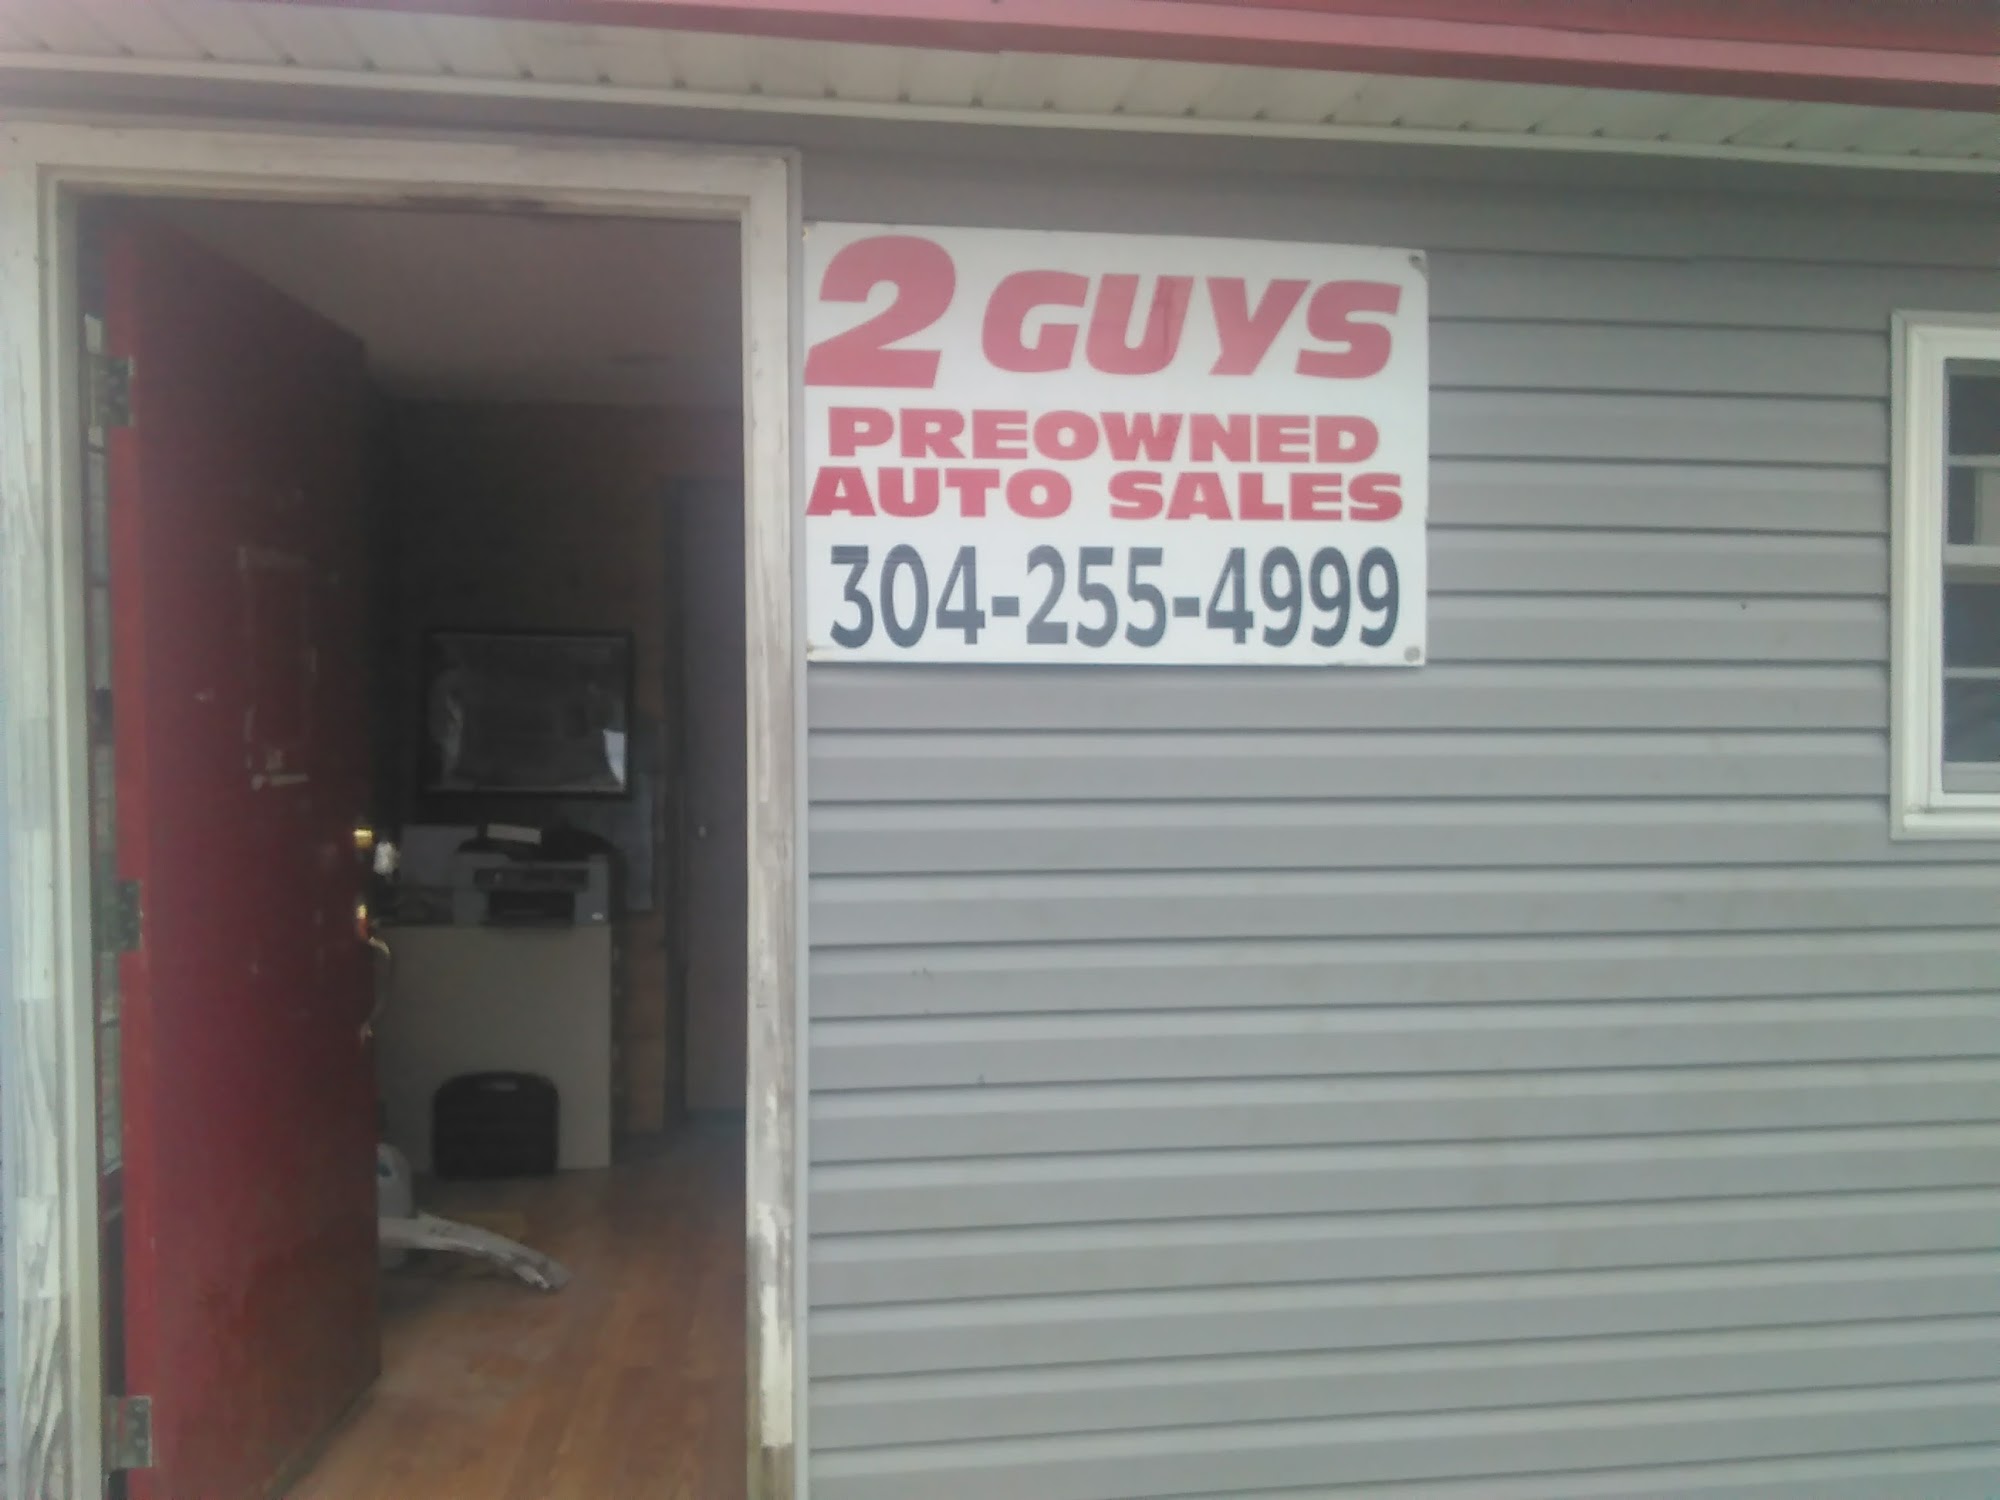 2 GUYS PREOWNED AUTO SALES